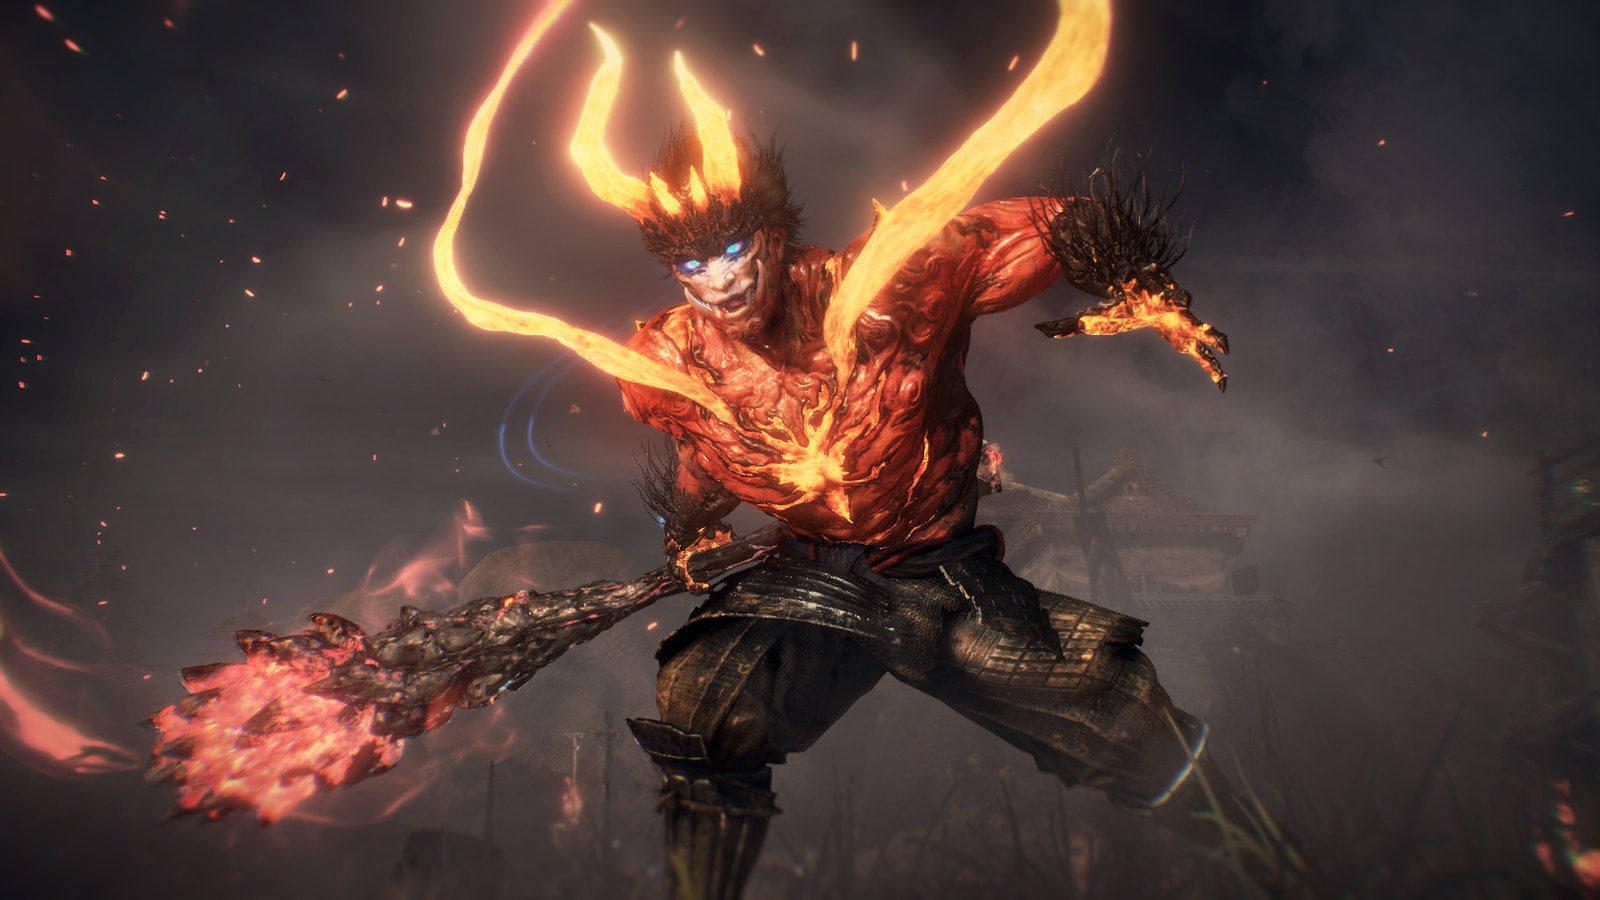 Image for Nioh 2 PS4 patch adds cross-save ahead of PS5 remaster launch